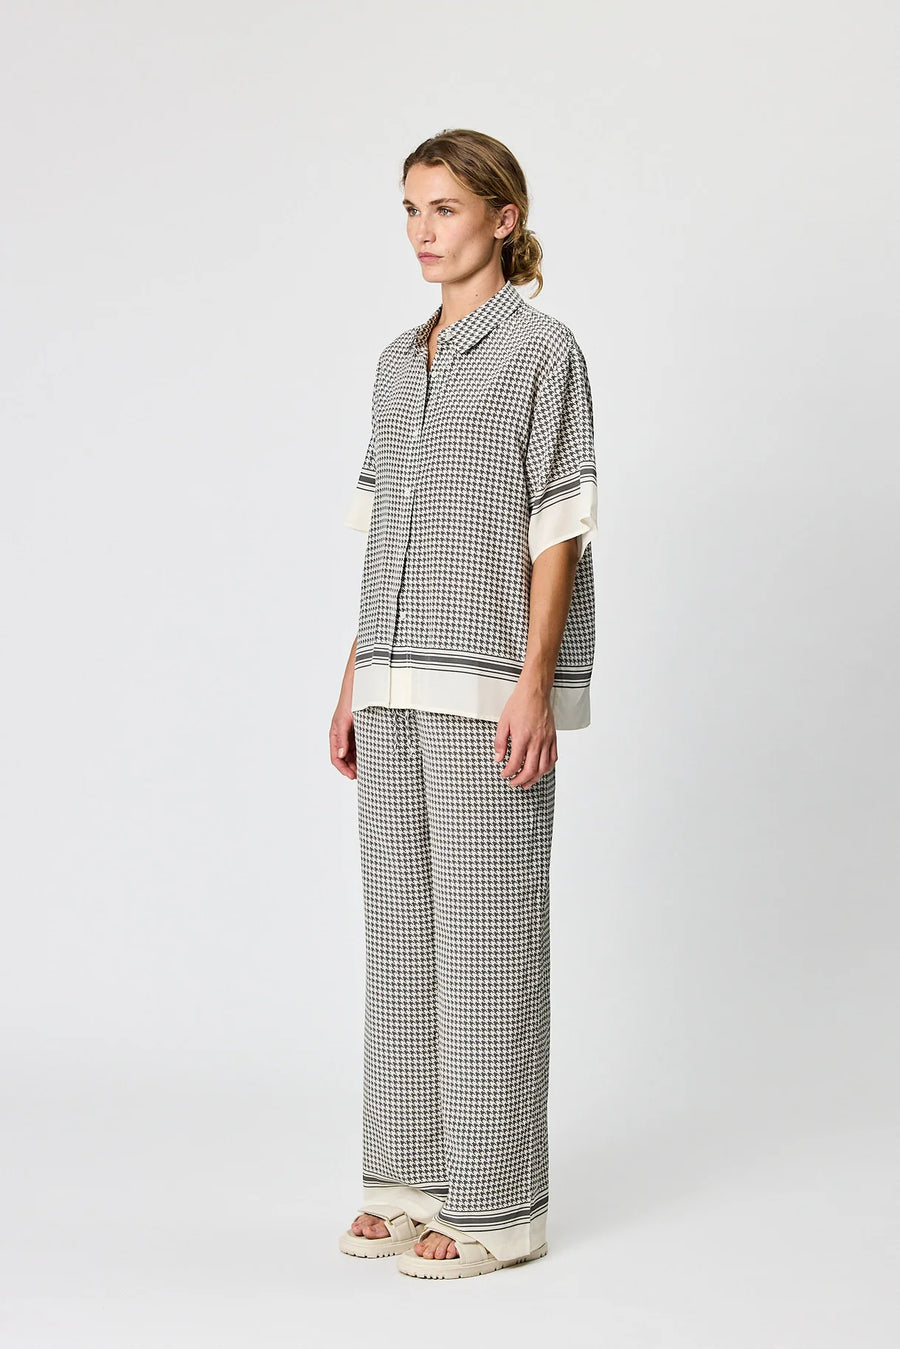 Remain | Blake Wide Leg Pant - Charcoal Houndstooth